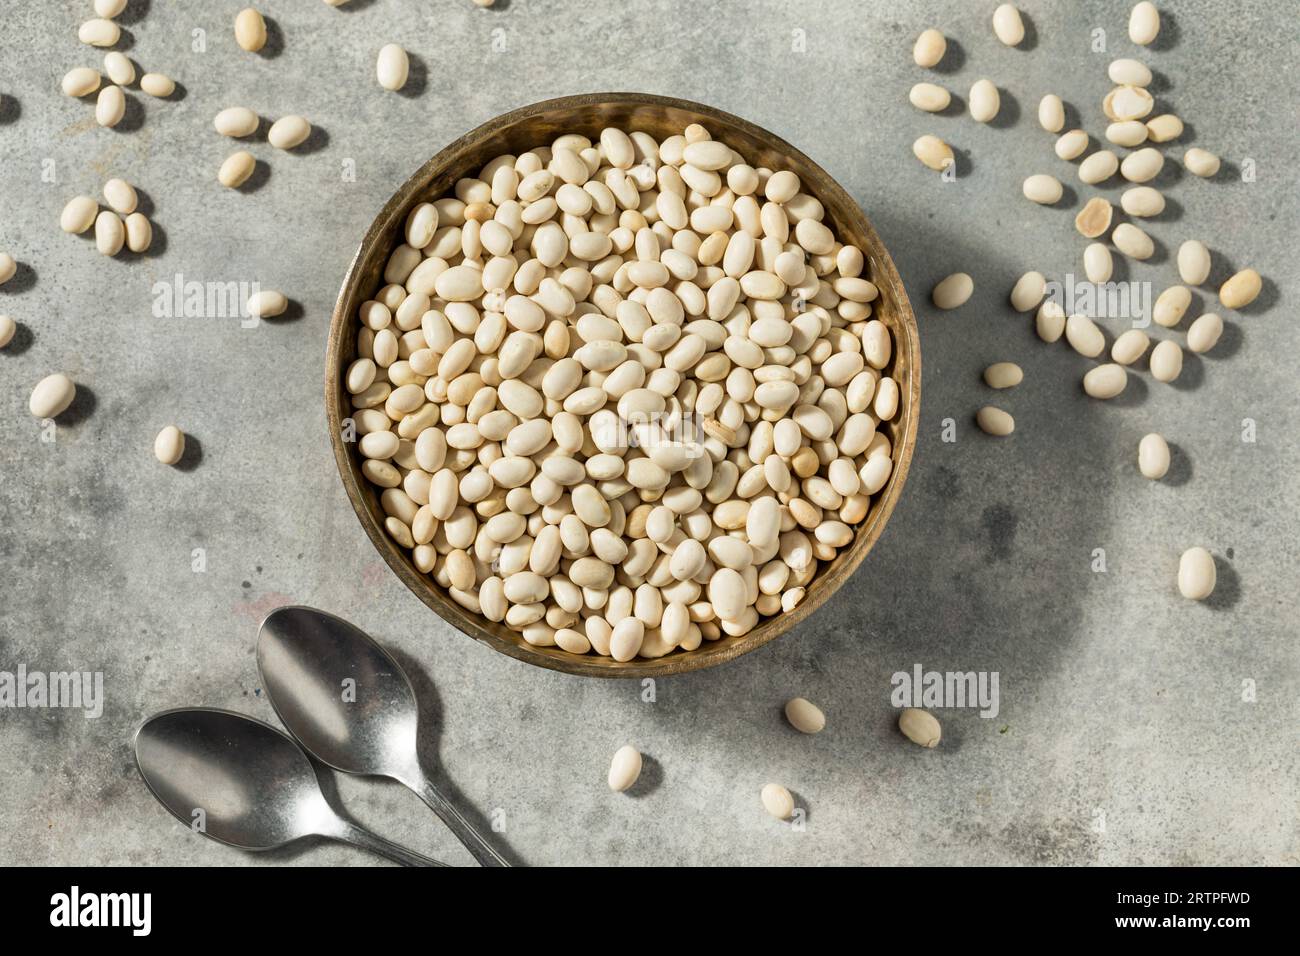 Organic White Navy Beans in a Bowl Stock Photo